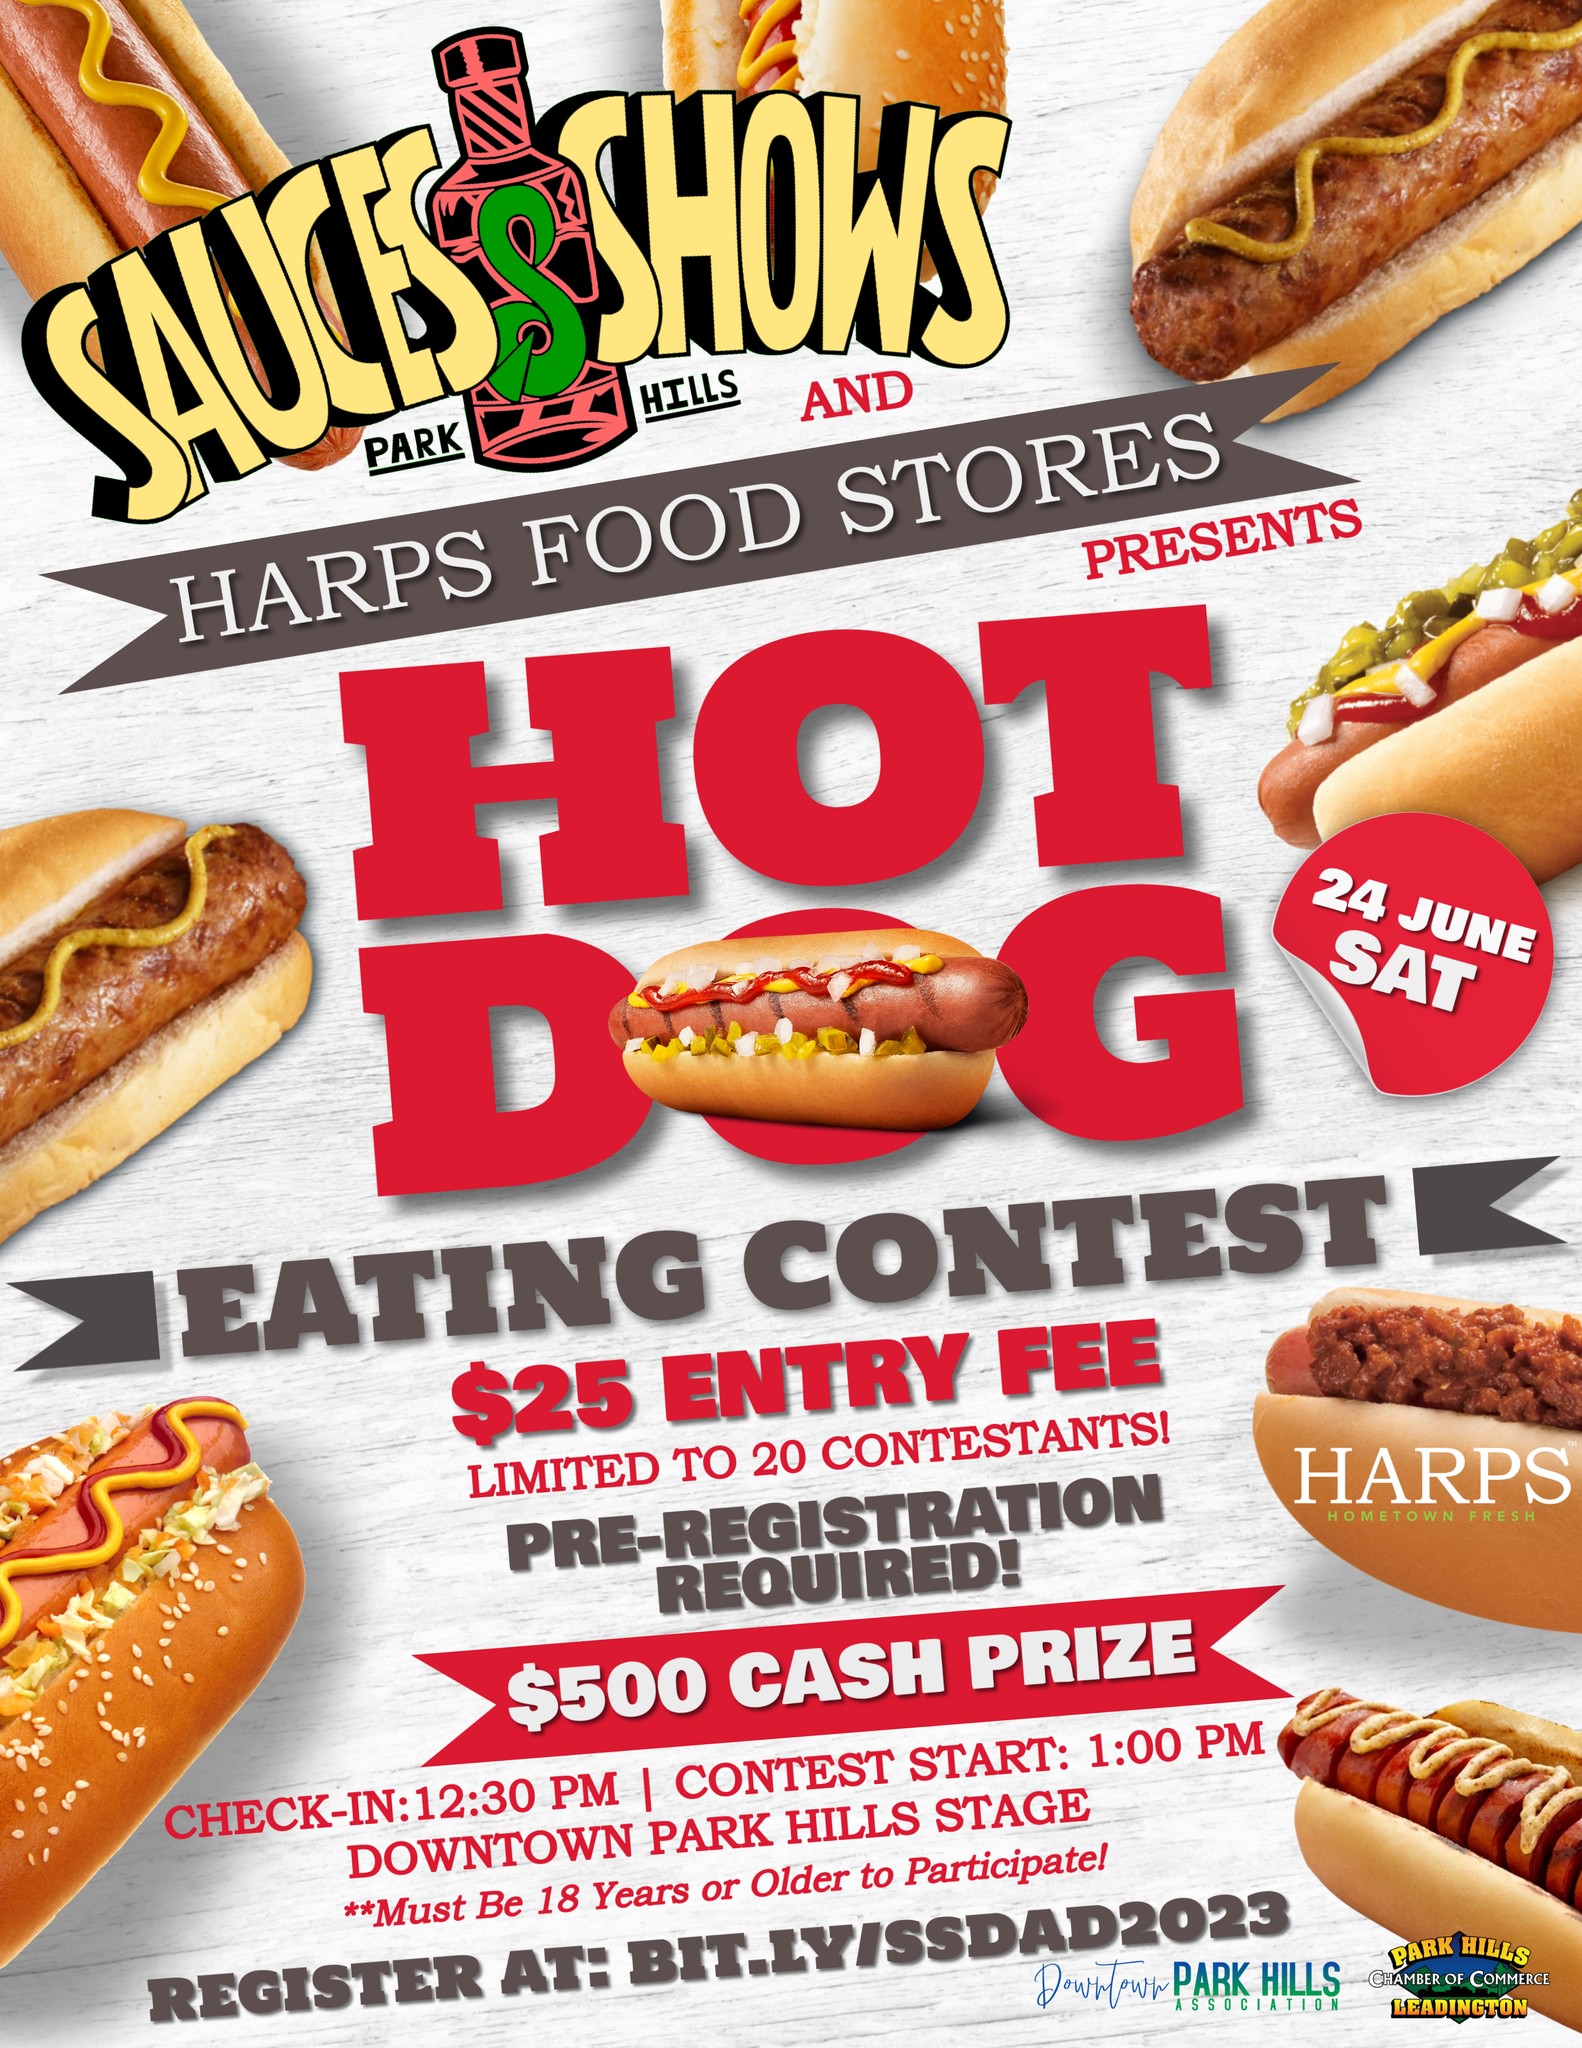 Enter Sauces and Shows Hot Dog Contest